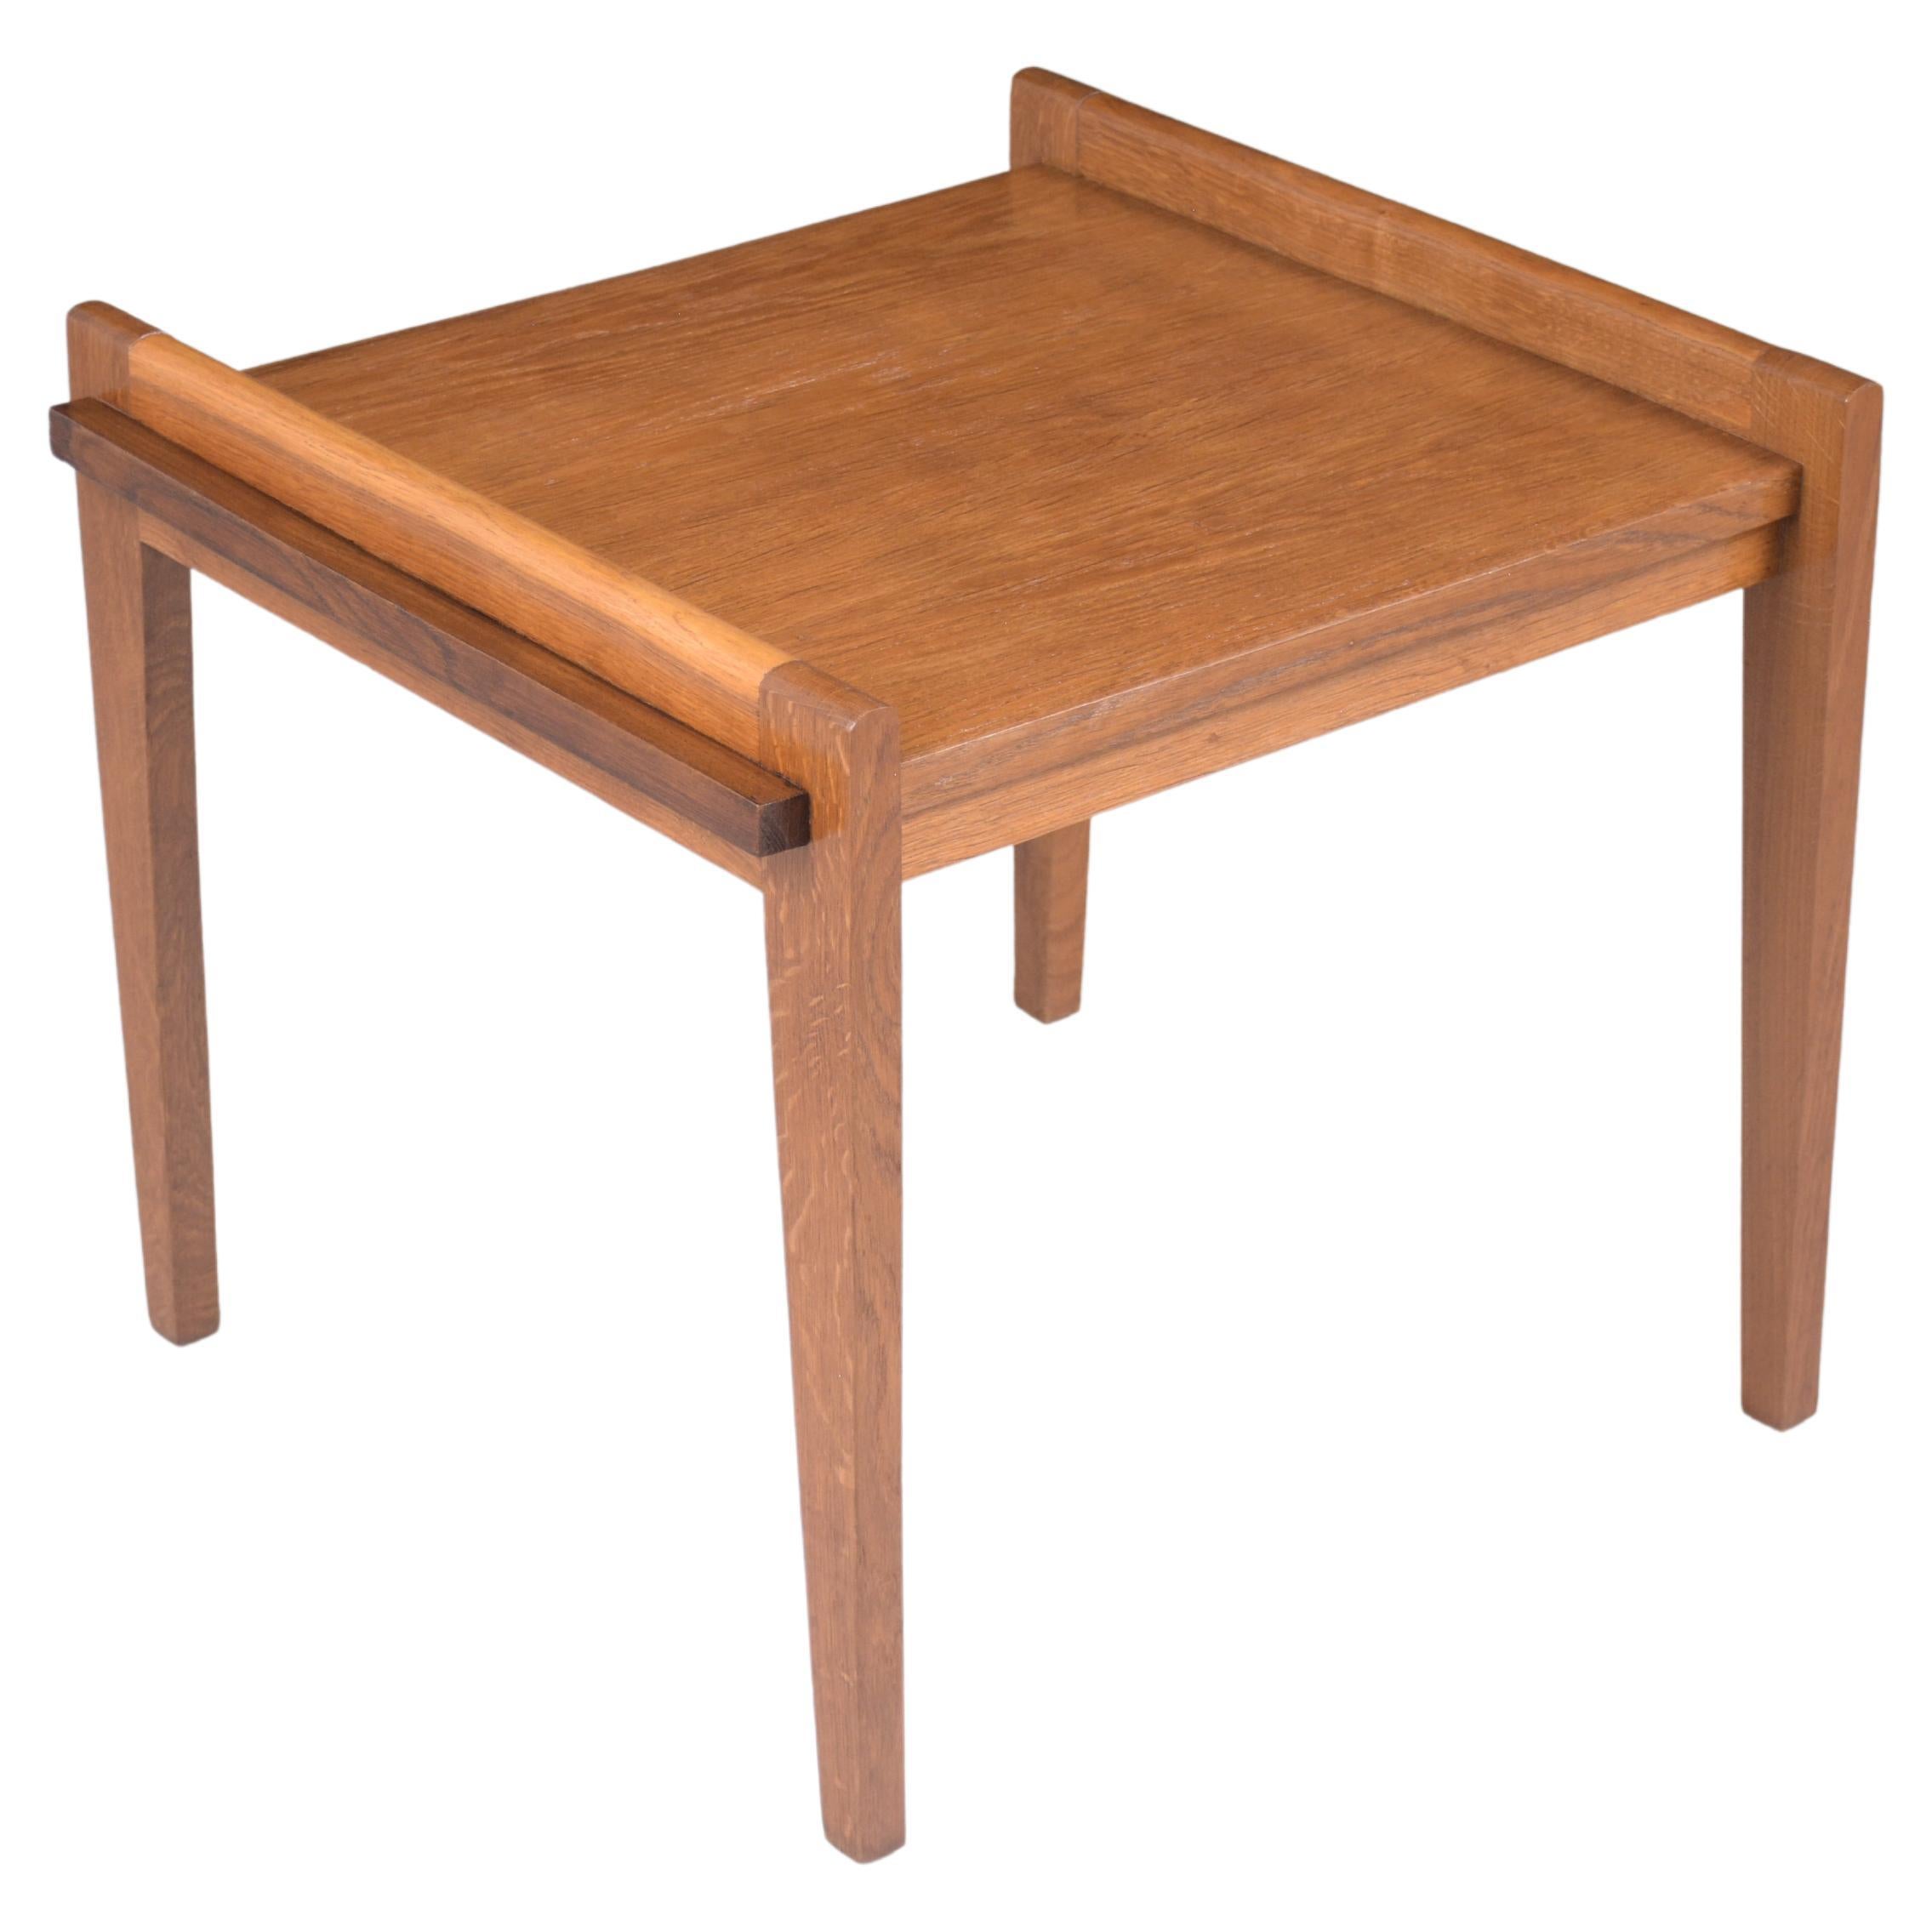 An extraordinary danish modern bedside table hand-crafted out of teak wood in great condition and has been completely restored by our professional craftsmen team. This mid-century side table is sleek and features a natural and brown stain color